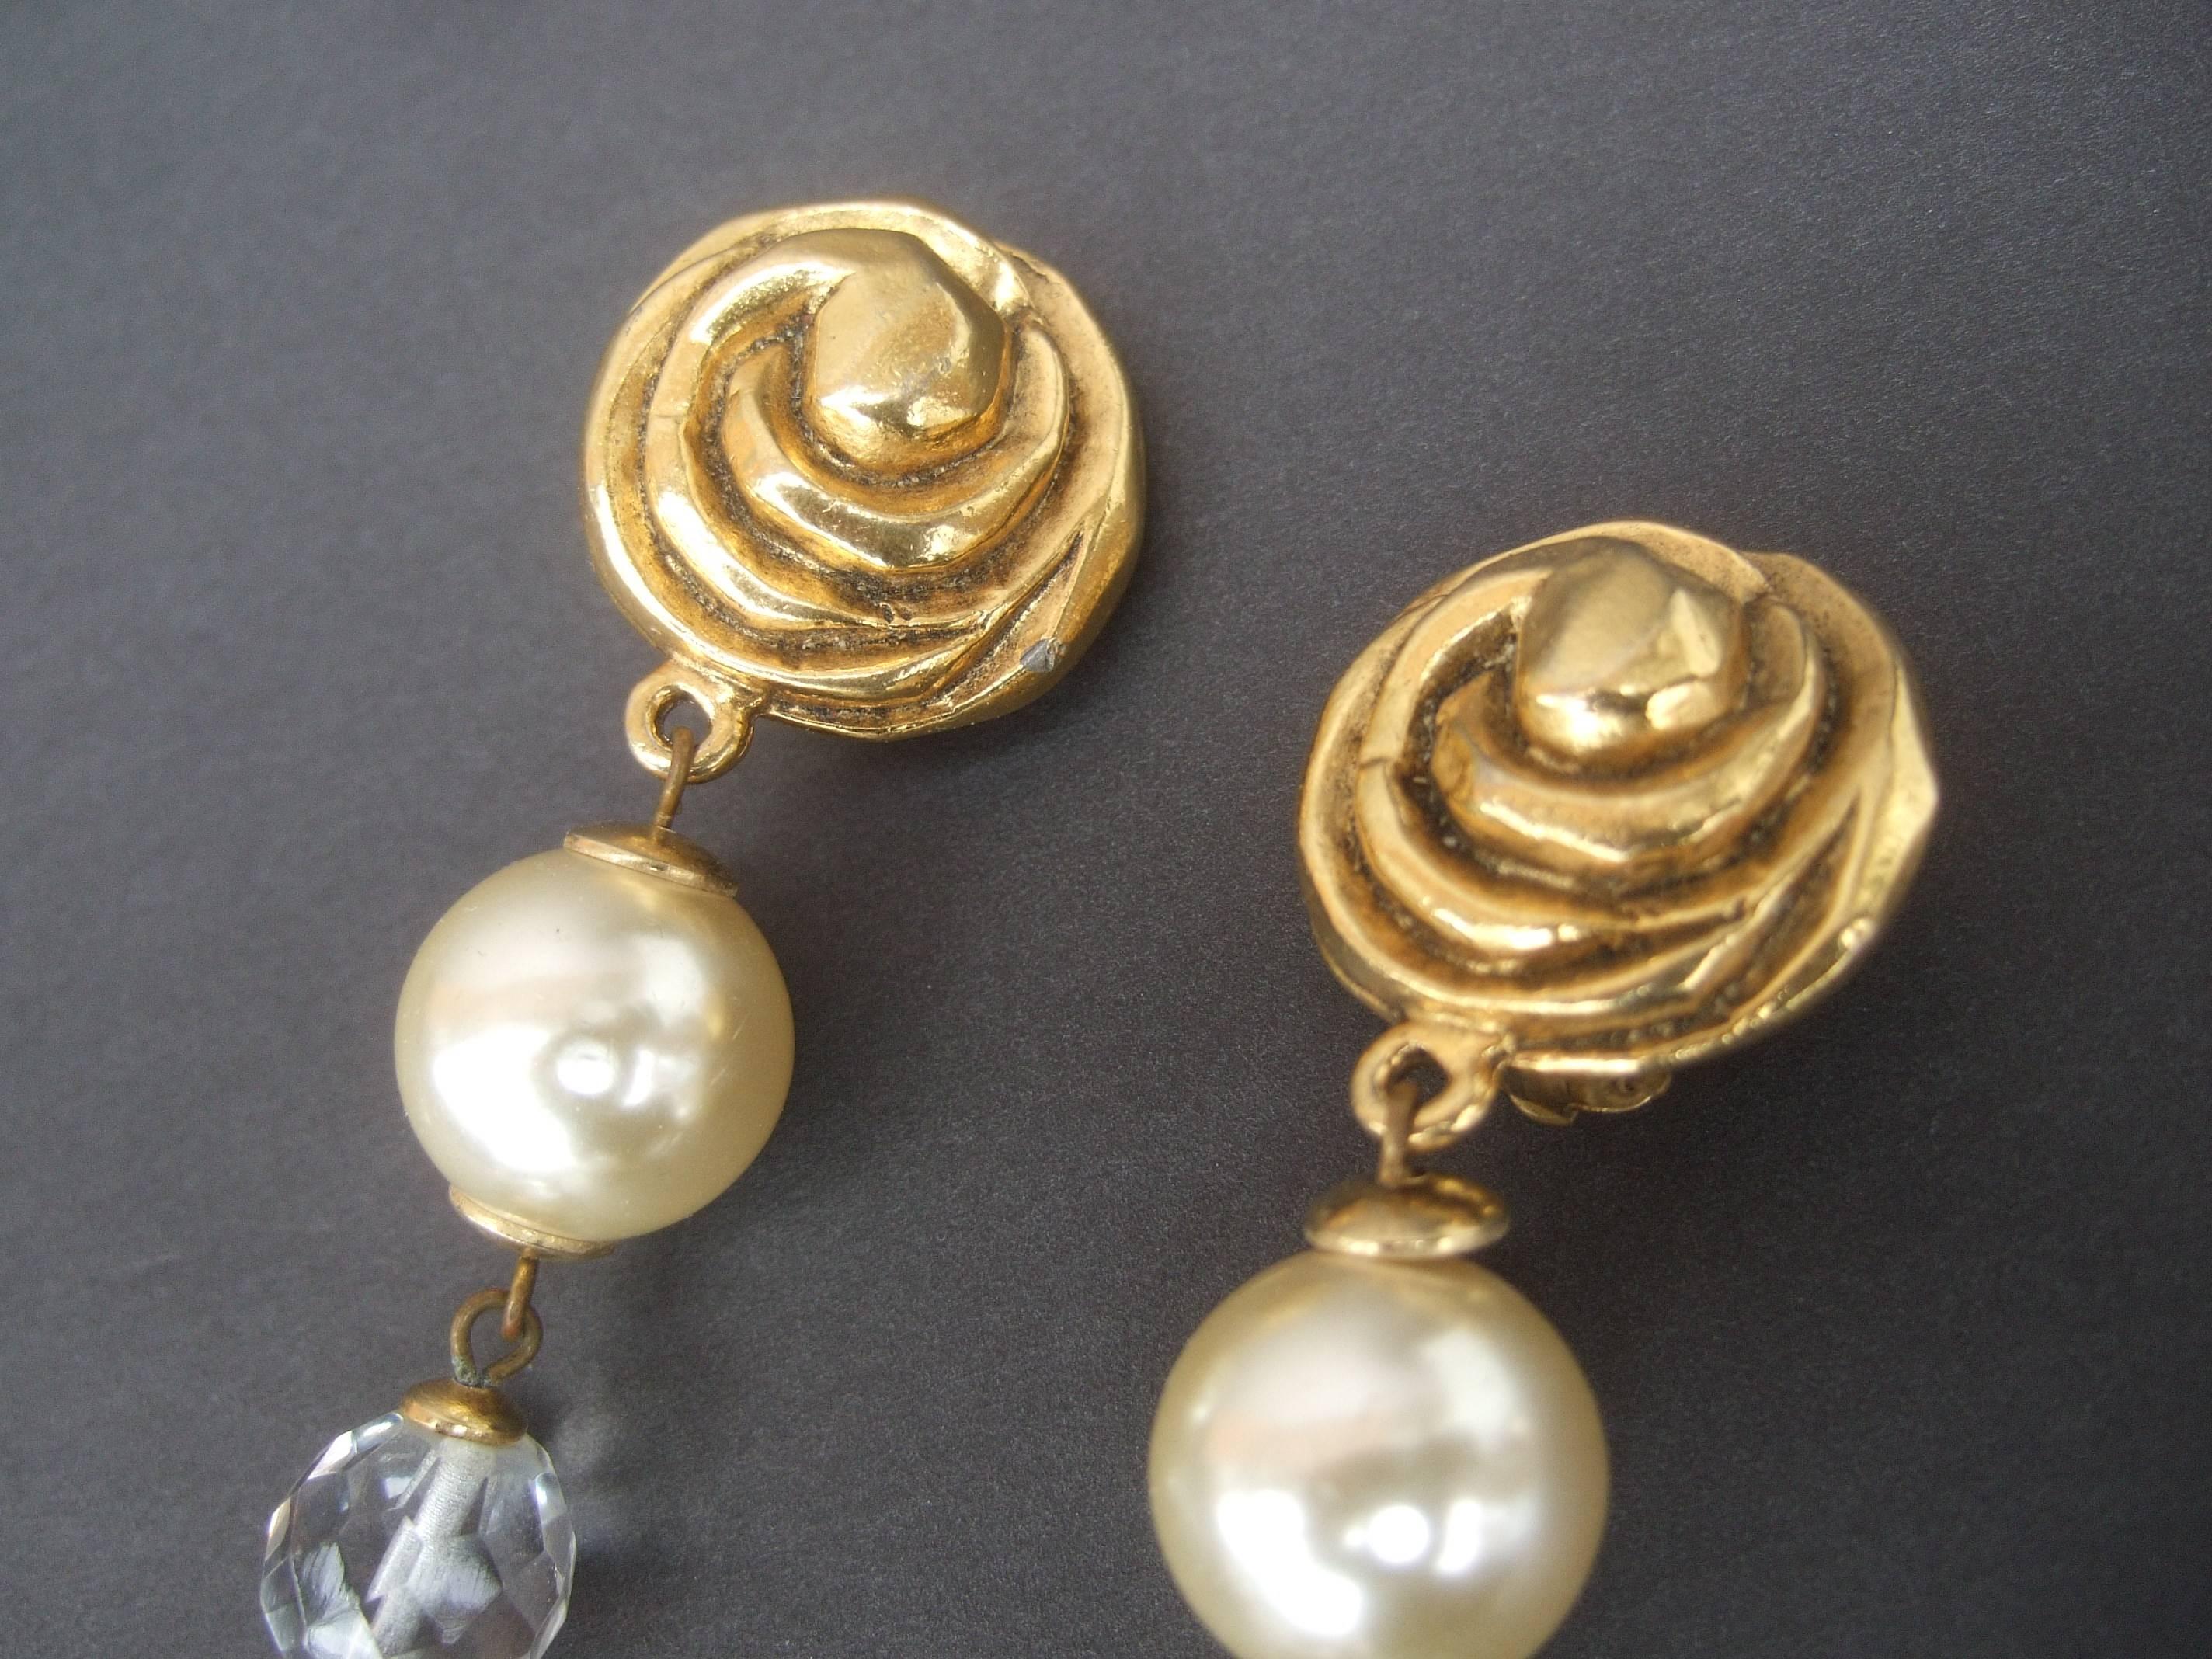 Baroque Revival French Resin Pearl Crystal Statement Earrings Designed by Poggi Paris circa 1980